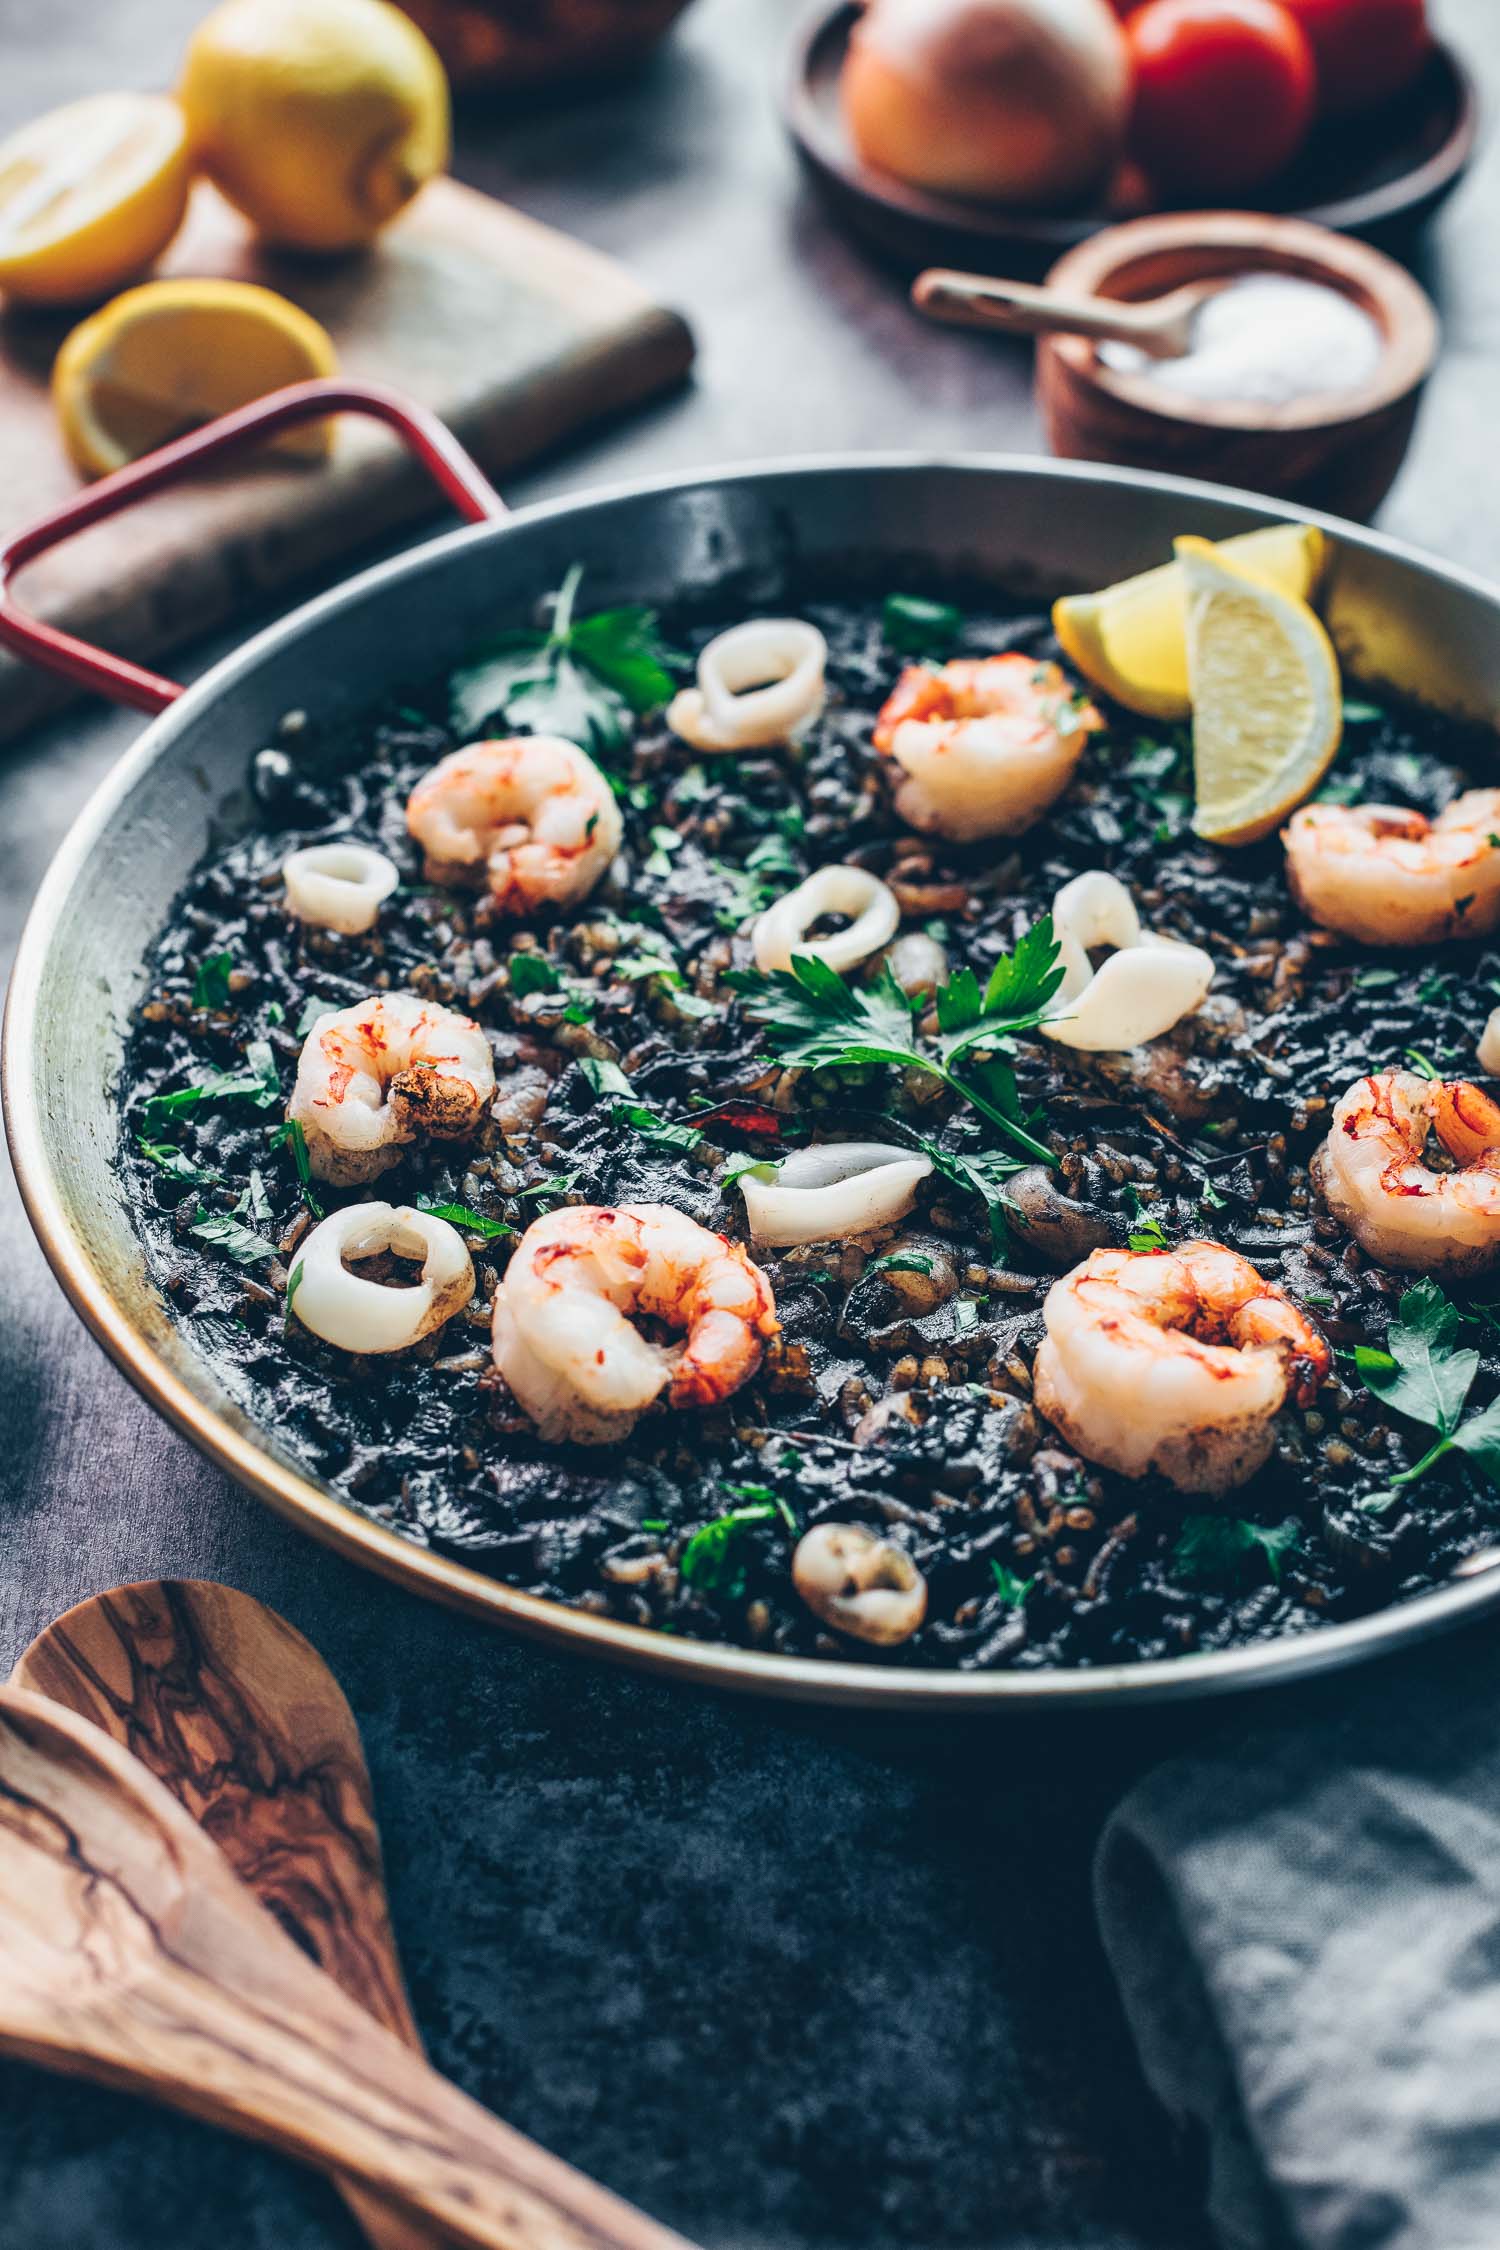 How To Make Squid Ink Seafood Paella